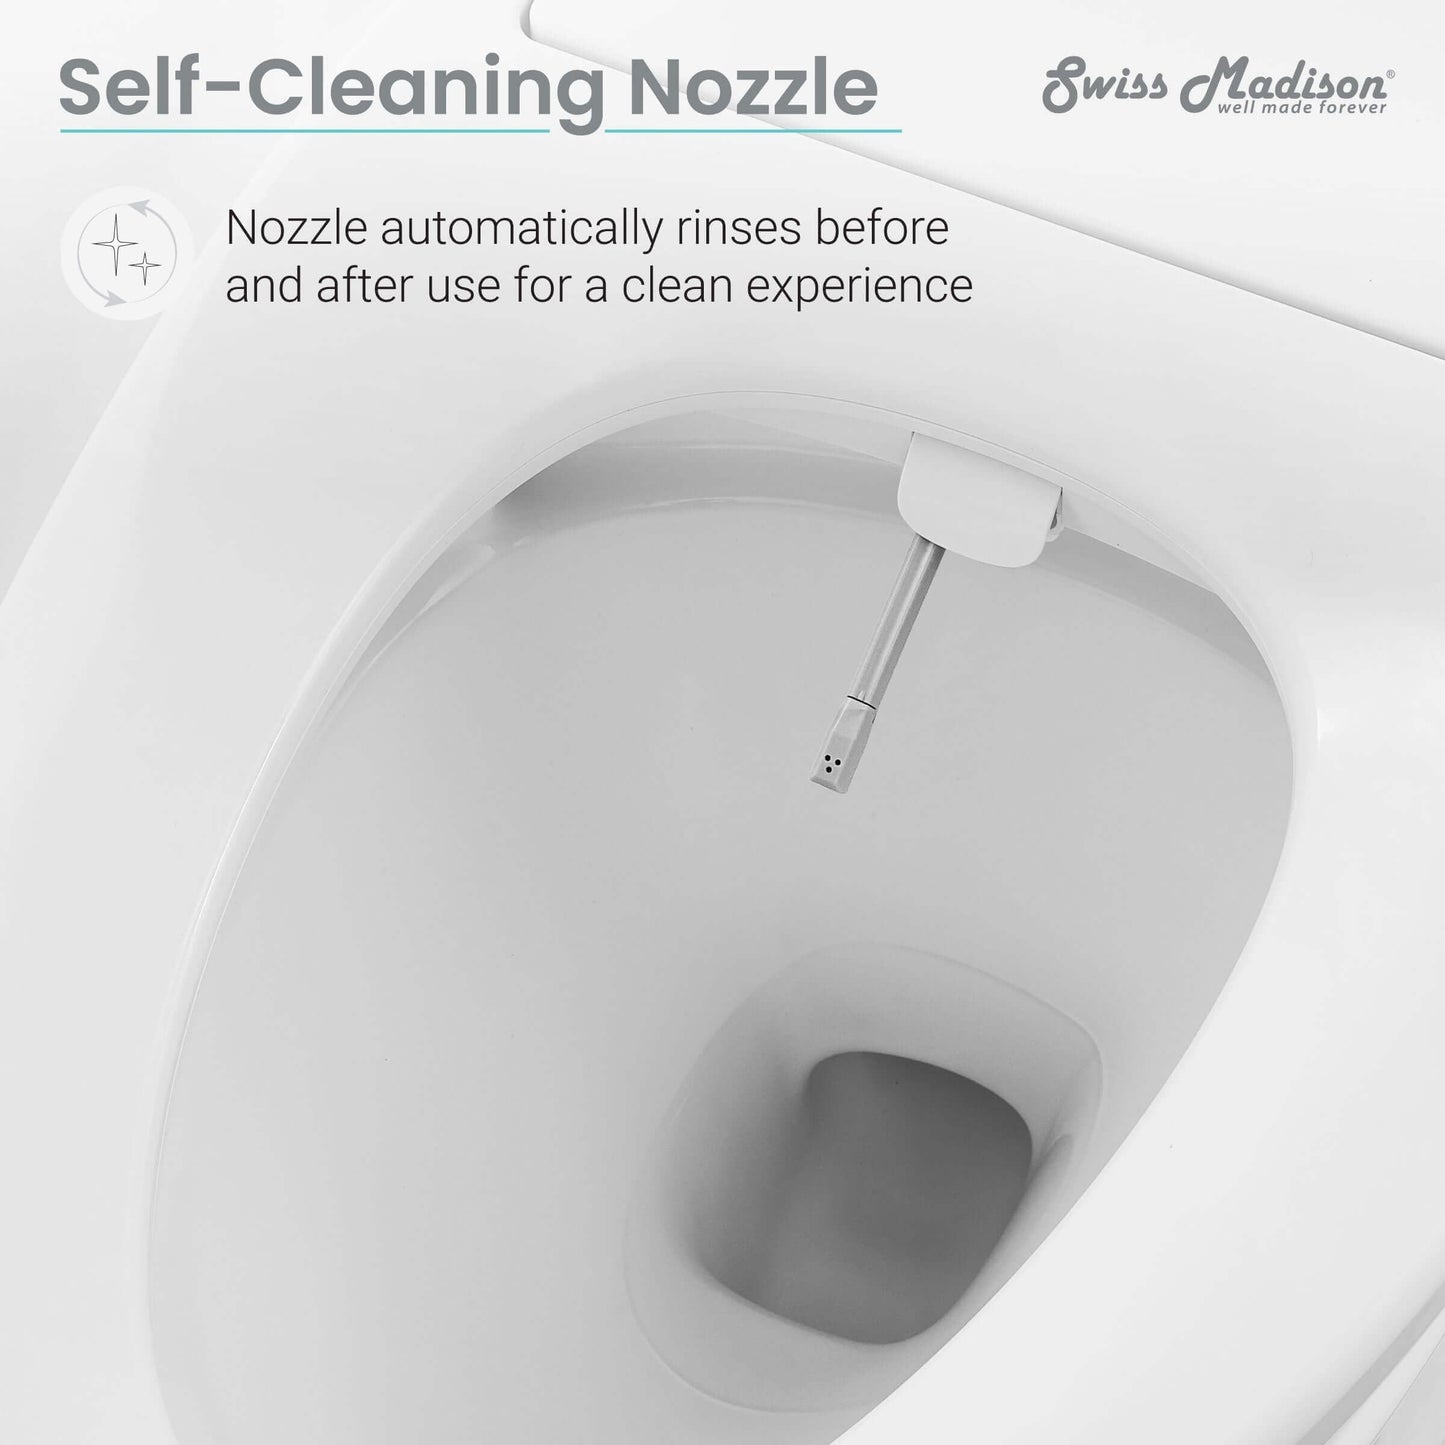 Cascade Smart Toilet Seat Bidet - top angled view of nozzle